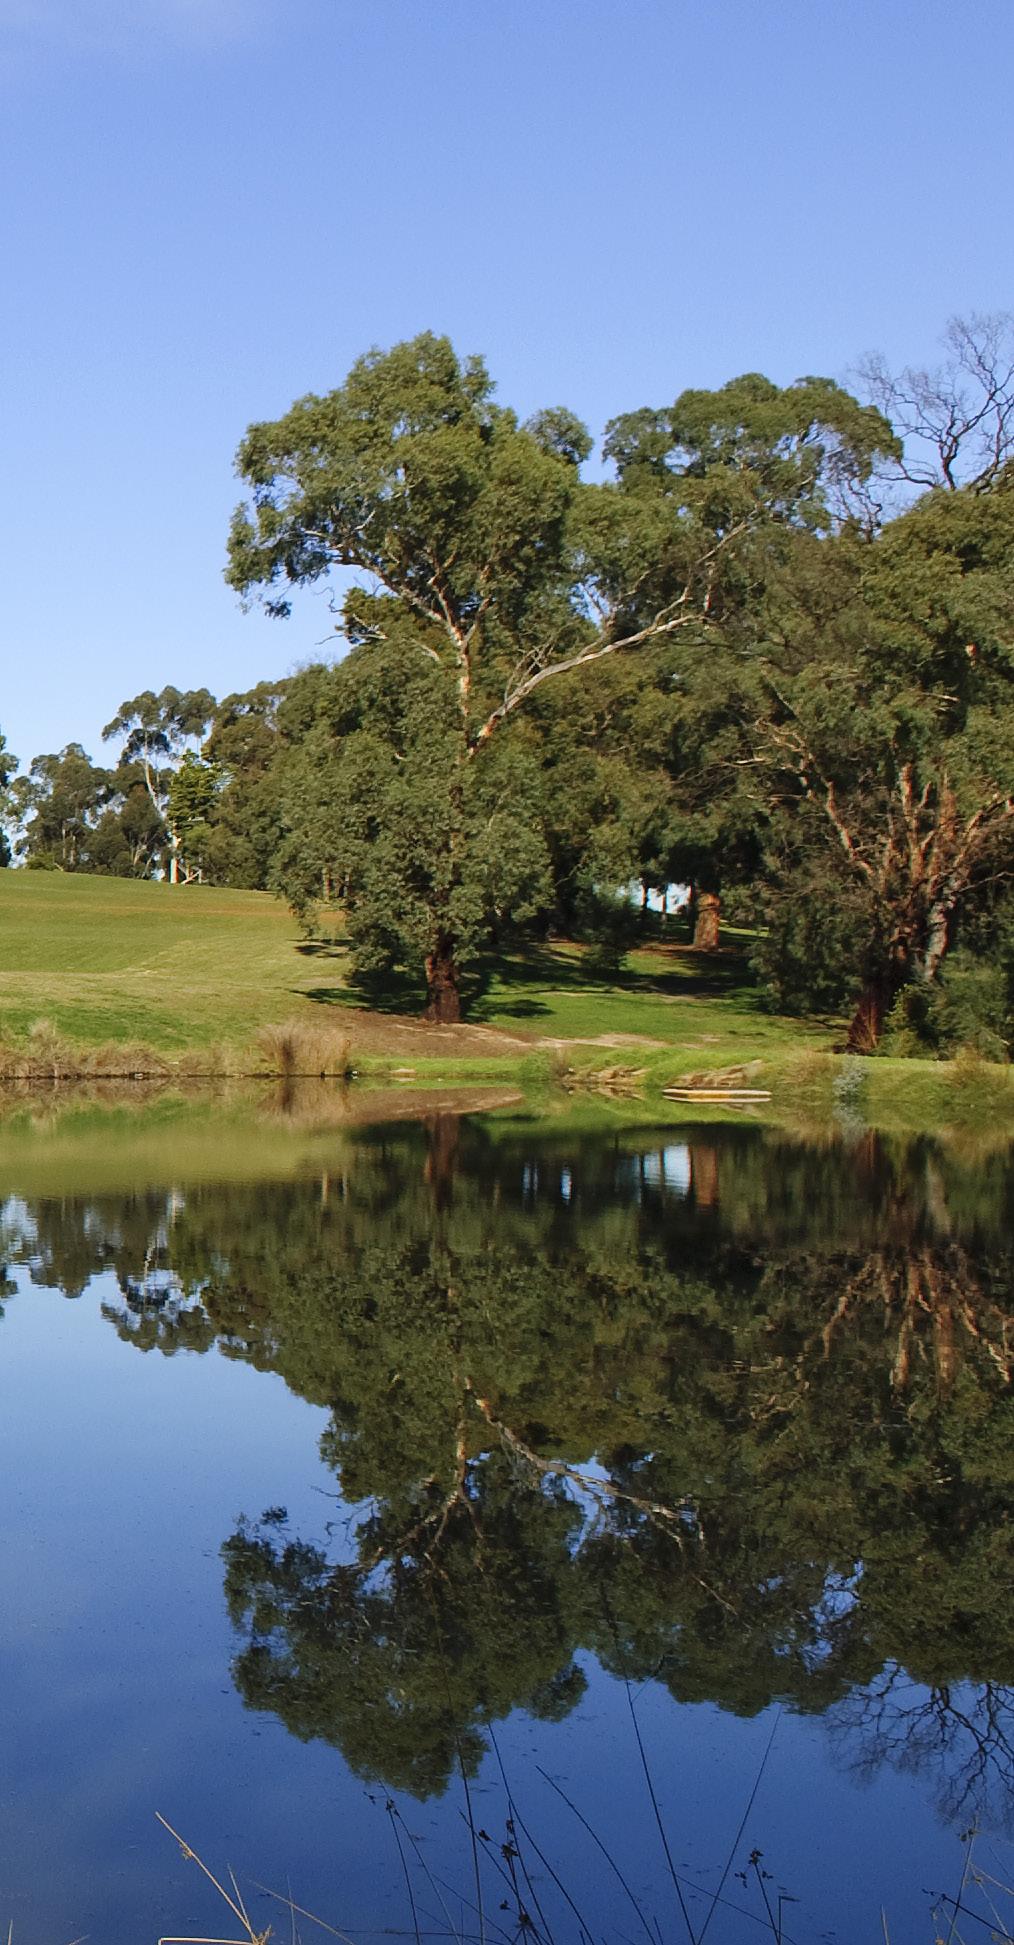 The Eastern Golf Course Development Plan has been prepared by Urbis on behalf of Mirvac, having regard to the requirements of the Eastern Golf Course Development Plan Overlay, and Clause 22.